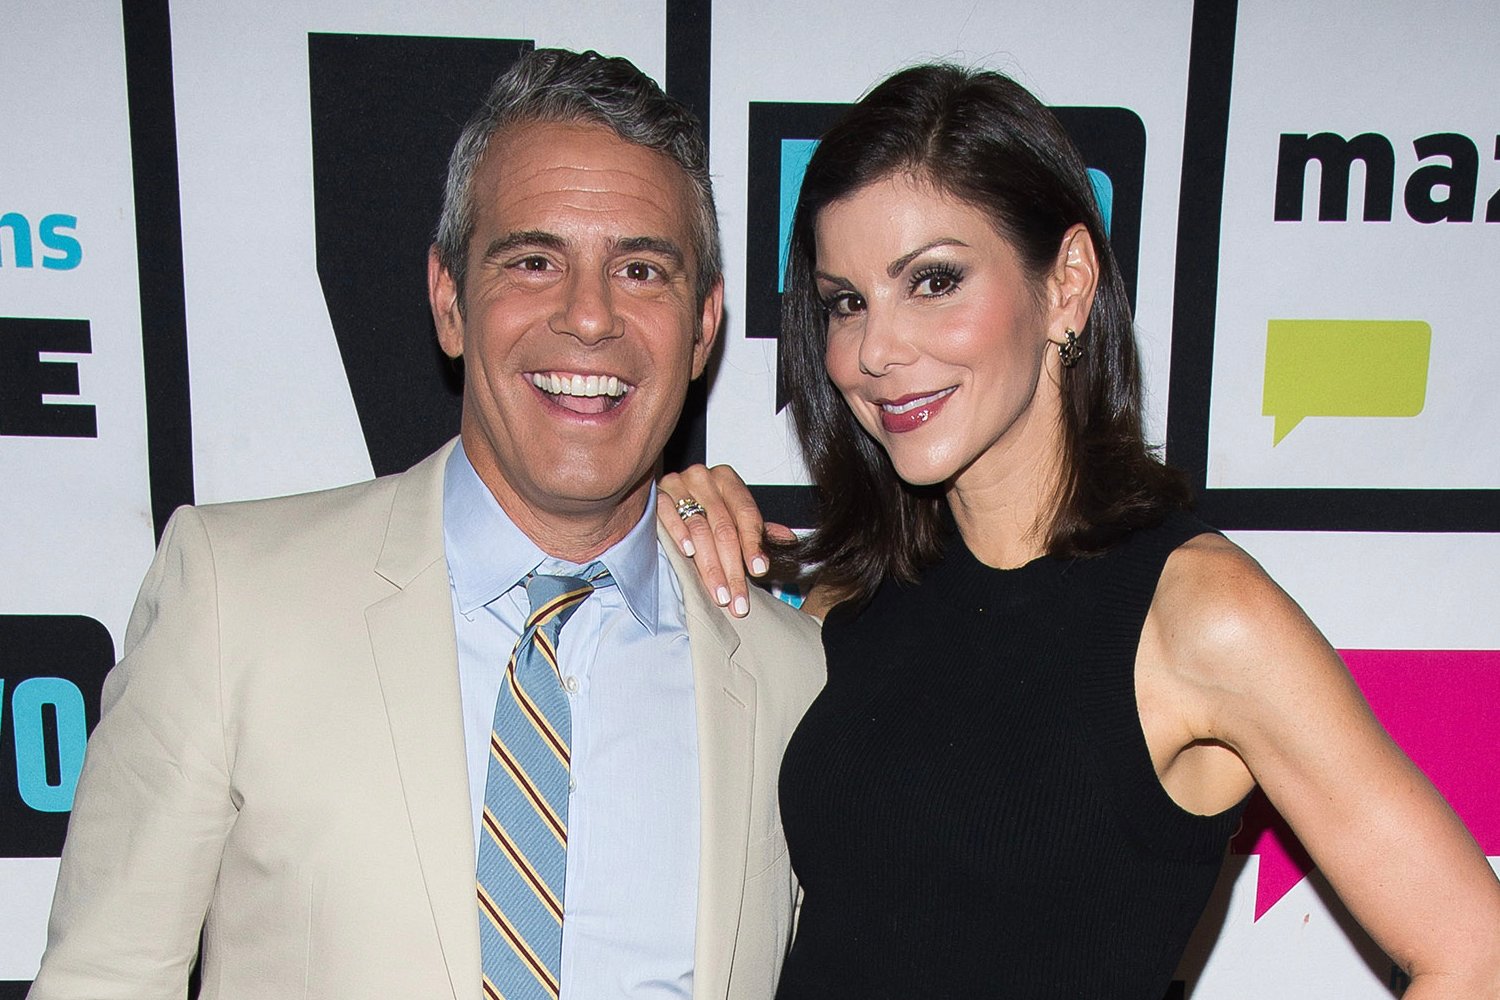 Andy Cohen Updates ‘RHOC’ Fans on Cast Shakeup as Heather Dubrow Returns in Season 16